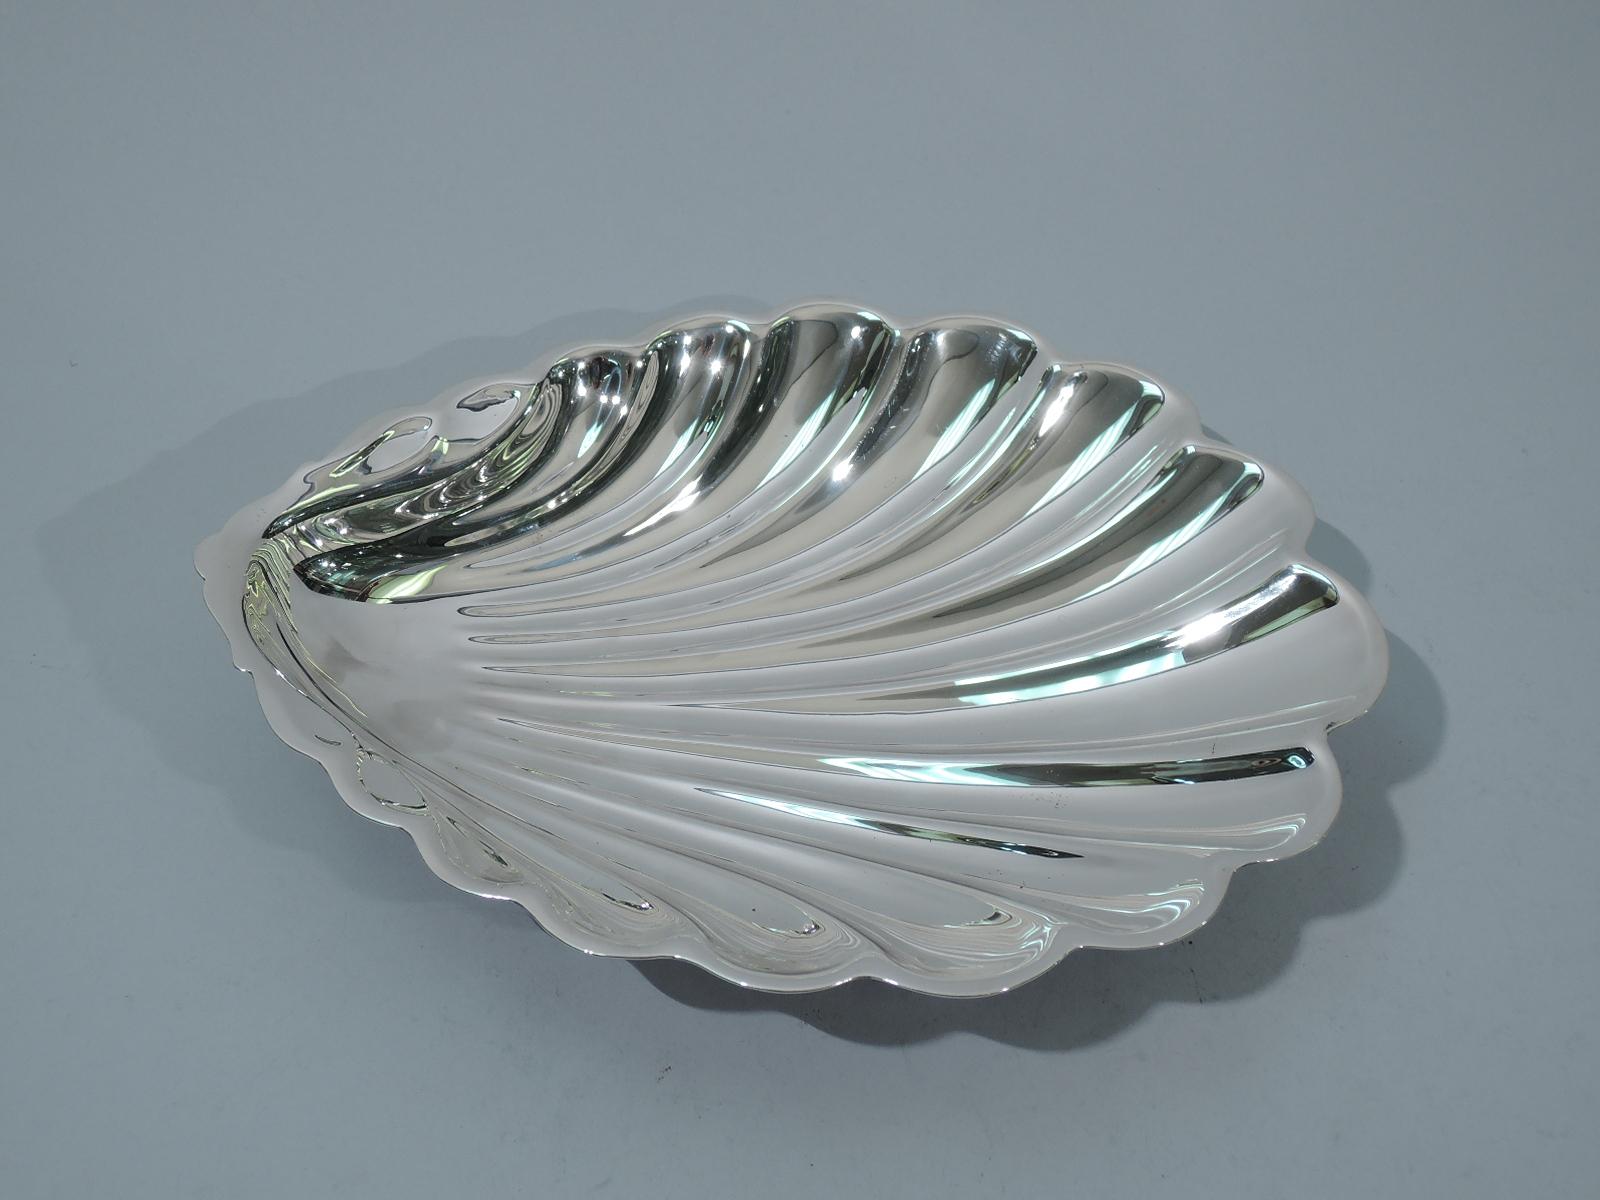 Large American Sterling Silver Scallop Shell Bowl by Gorham In Excellent Condition For Sale In New York, NY